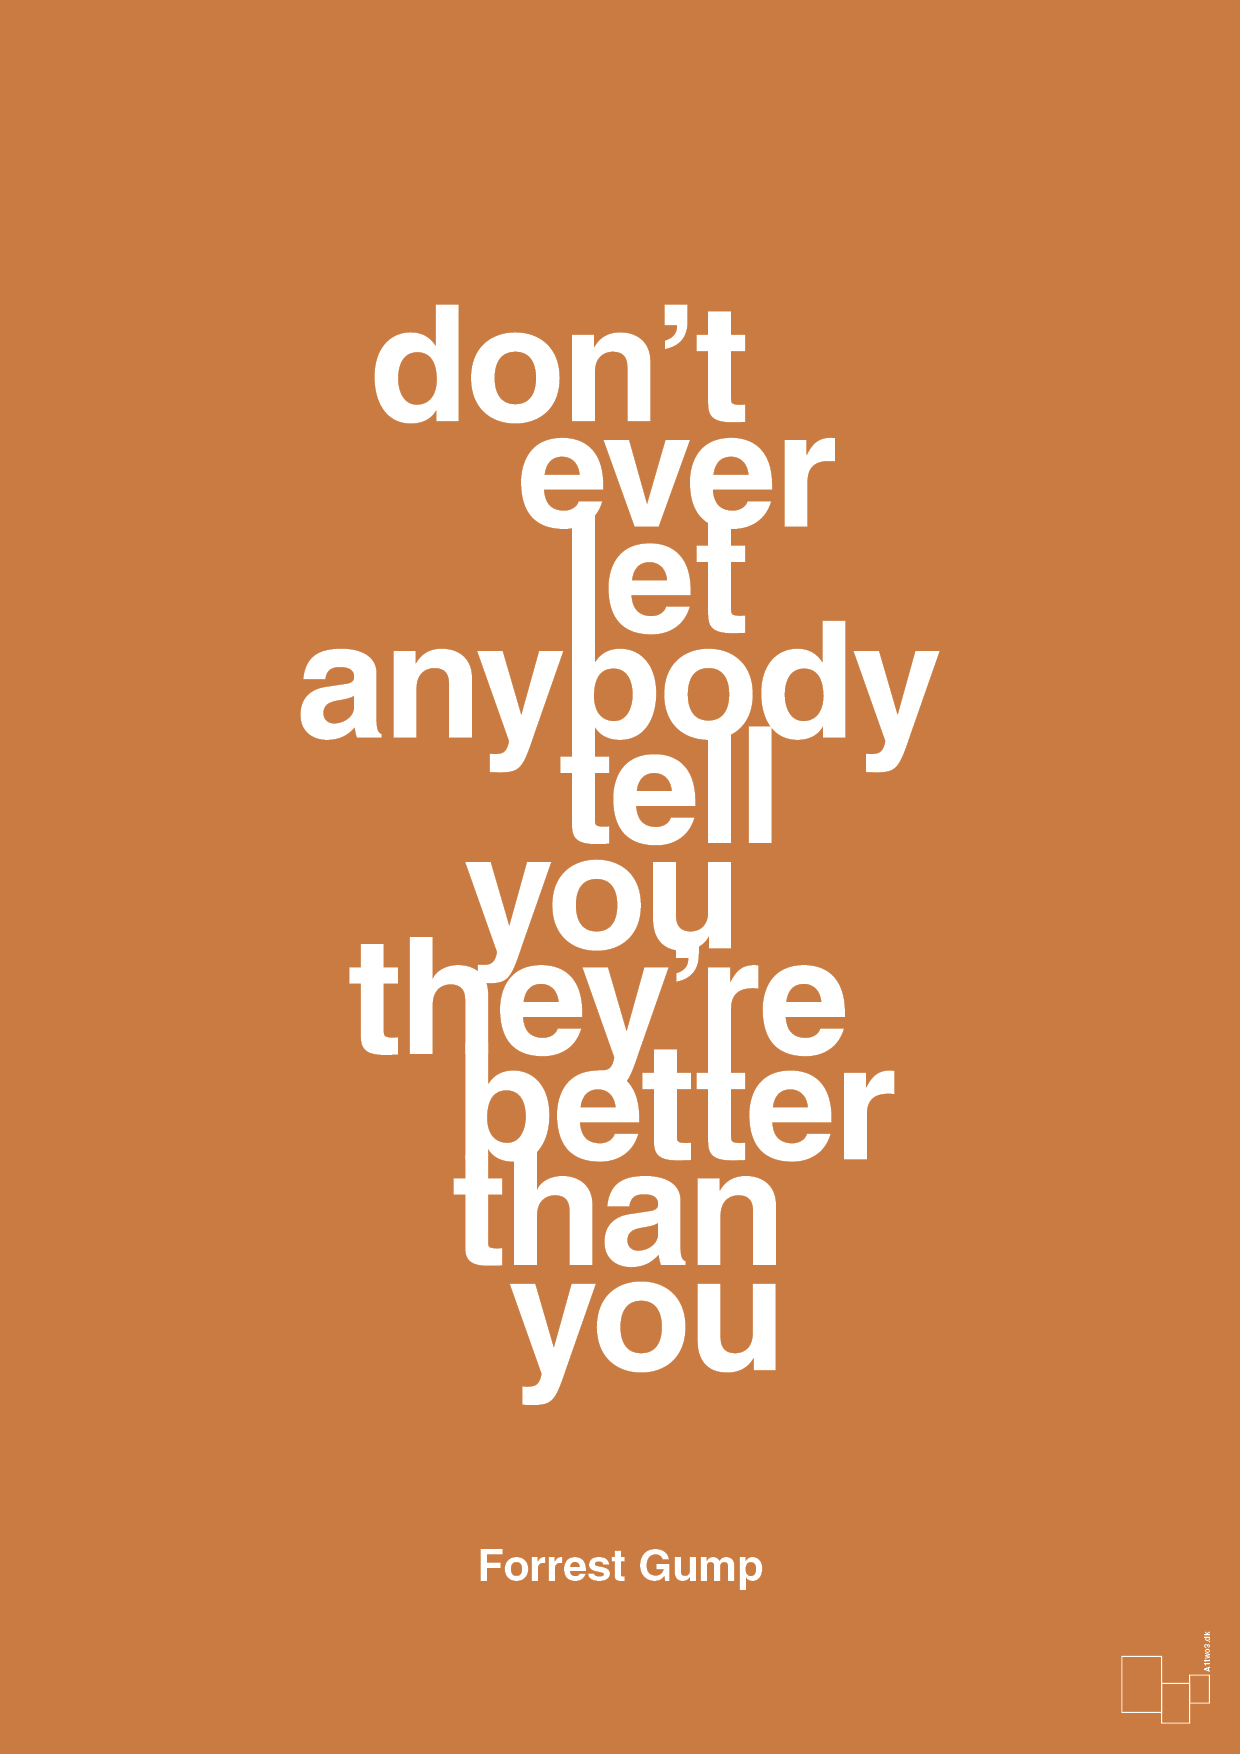 don’t ever let anybody tell you they’re better than you - Plakat med Citater i Rumba Orange